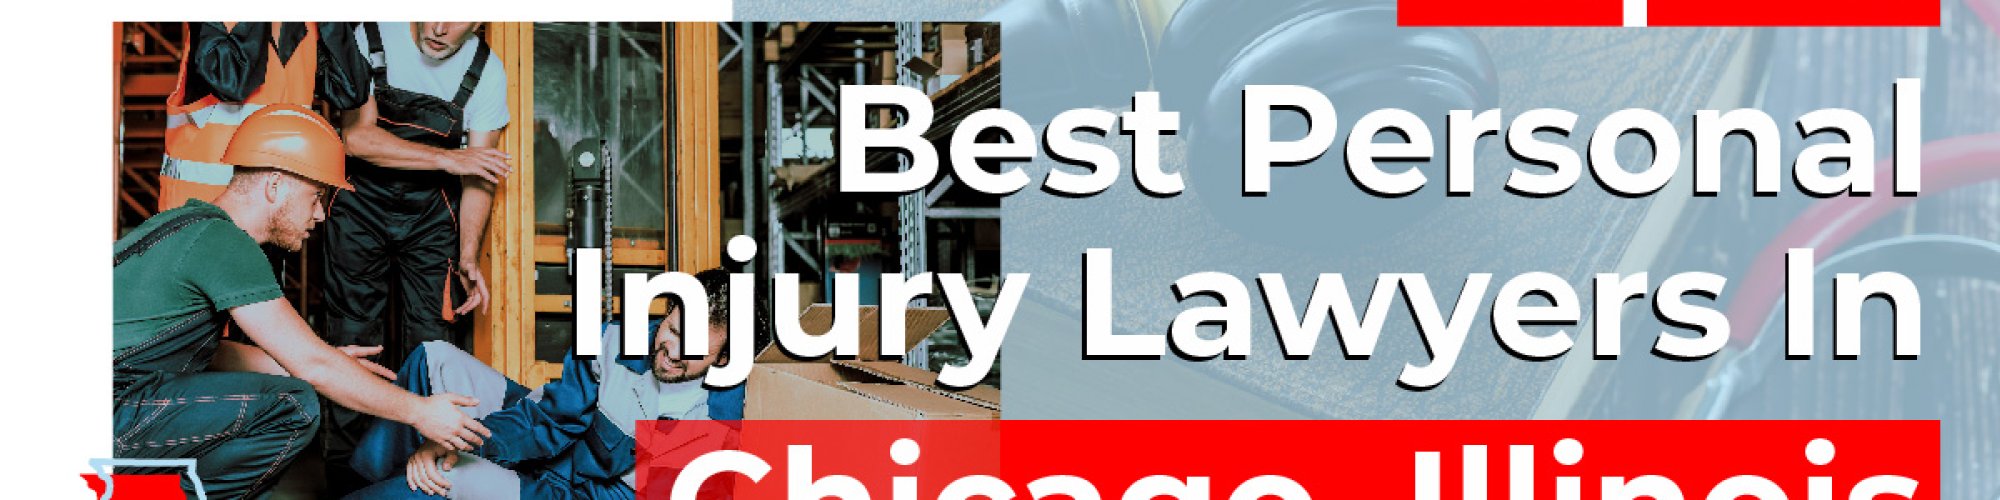 Top 10 Best Personal Injury Lawyers in Chicago, Illinois